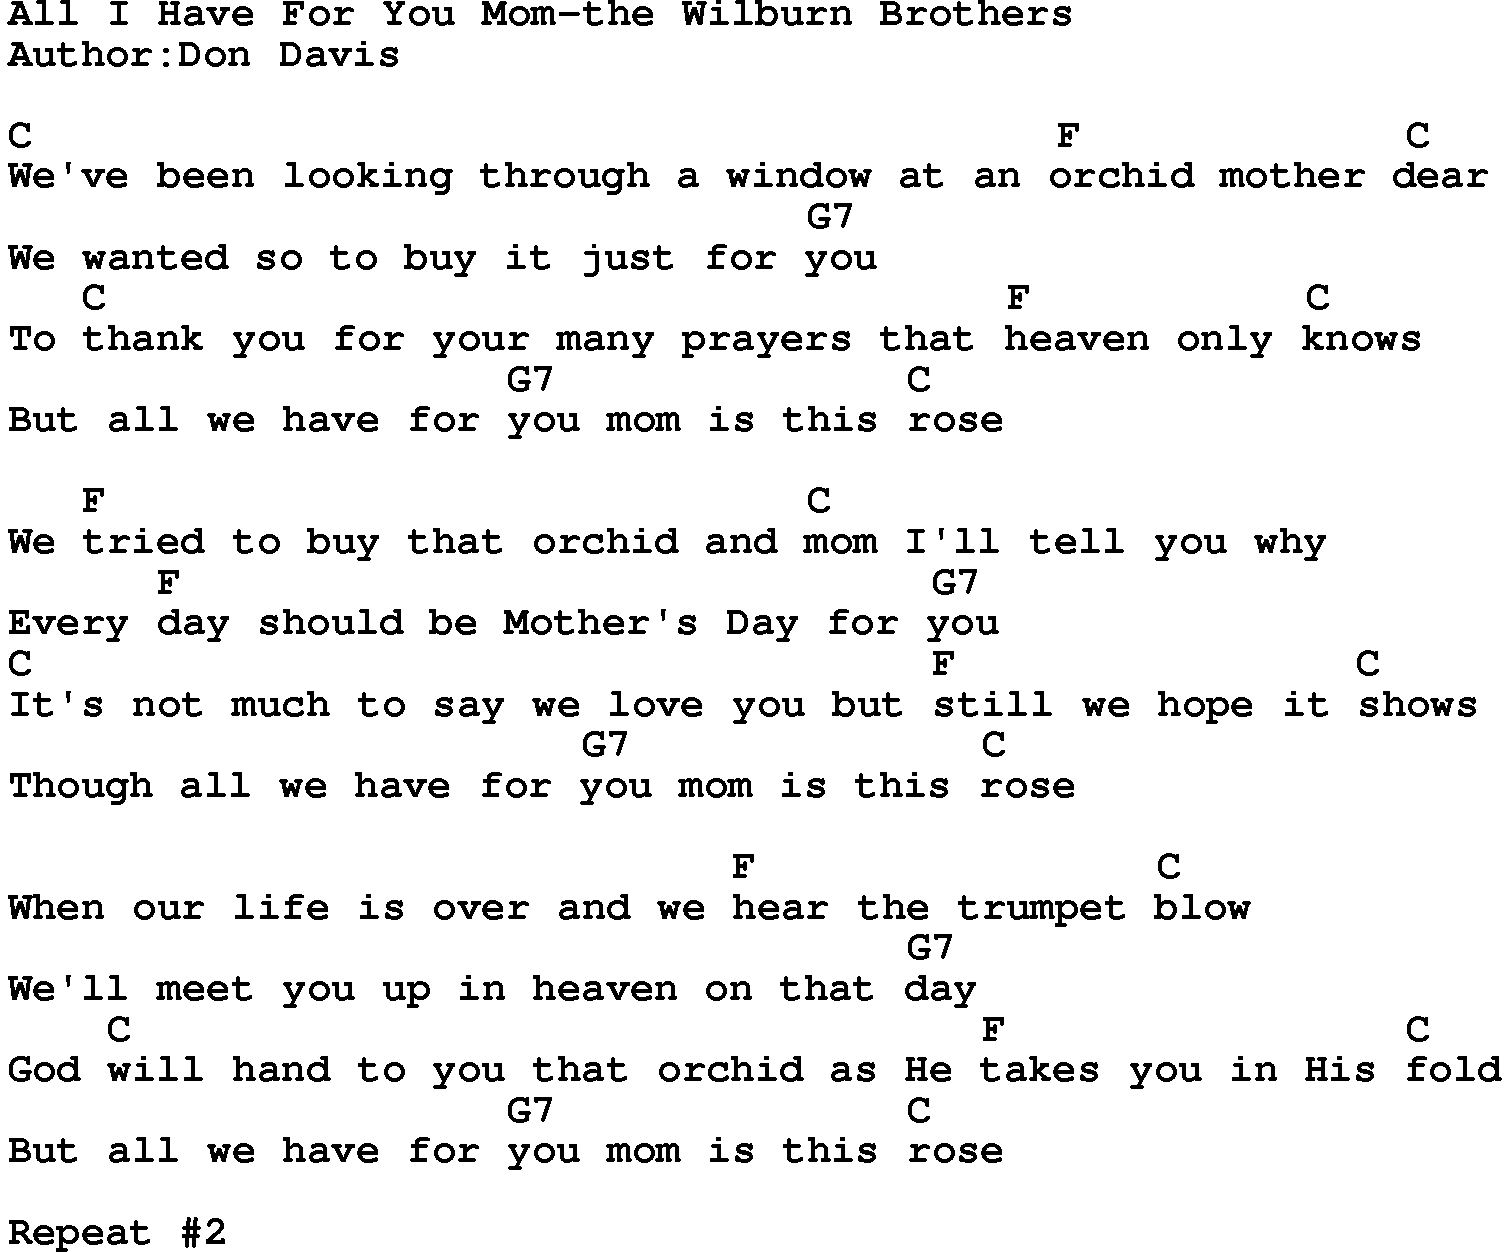 Country music song: All I Have For You Mom-The Wilburn Brothers lyrics and chords